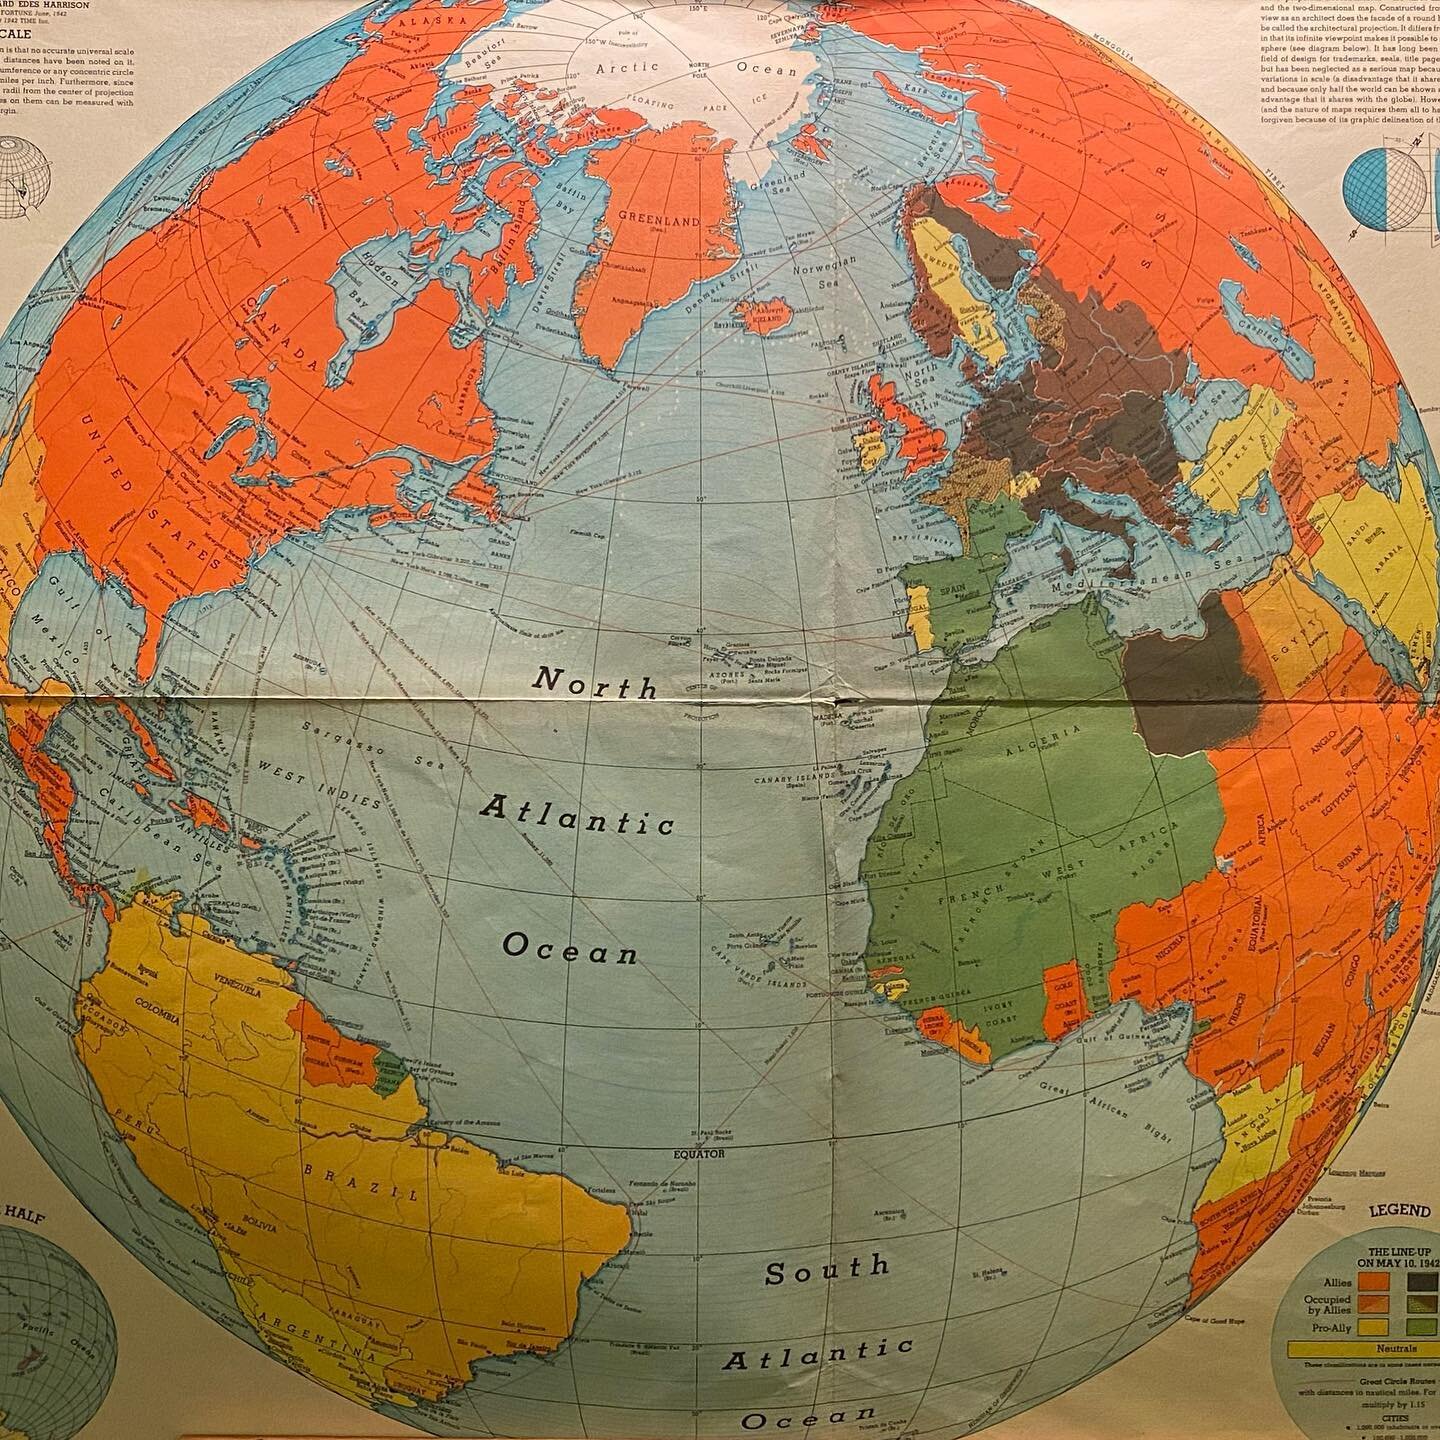 A fortune map. 1942
War times, allies and axis of evil. 
#timemagazine 
#map